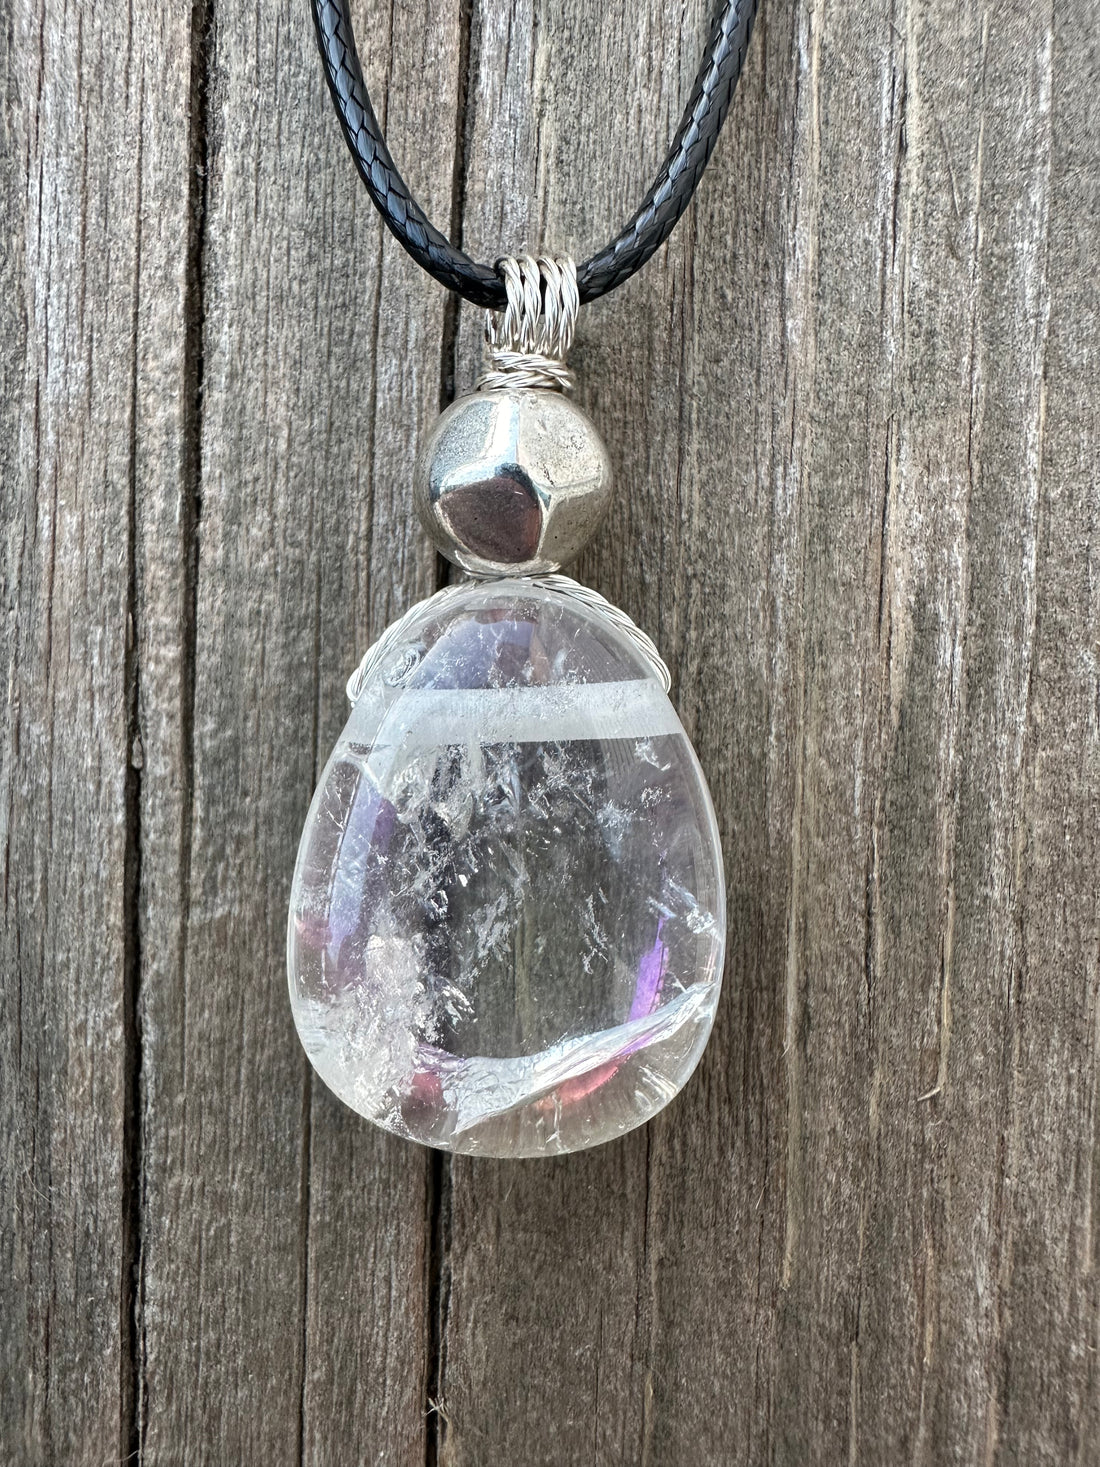 Angel Aura Quartz for Awakening and Releasing Karmic Ties. Swirl to Signify Consciousness.